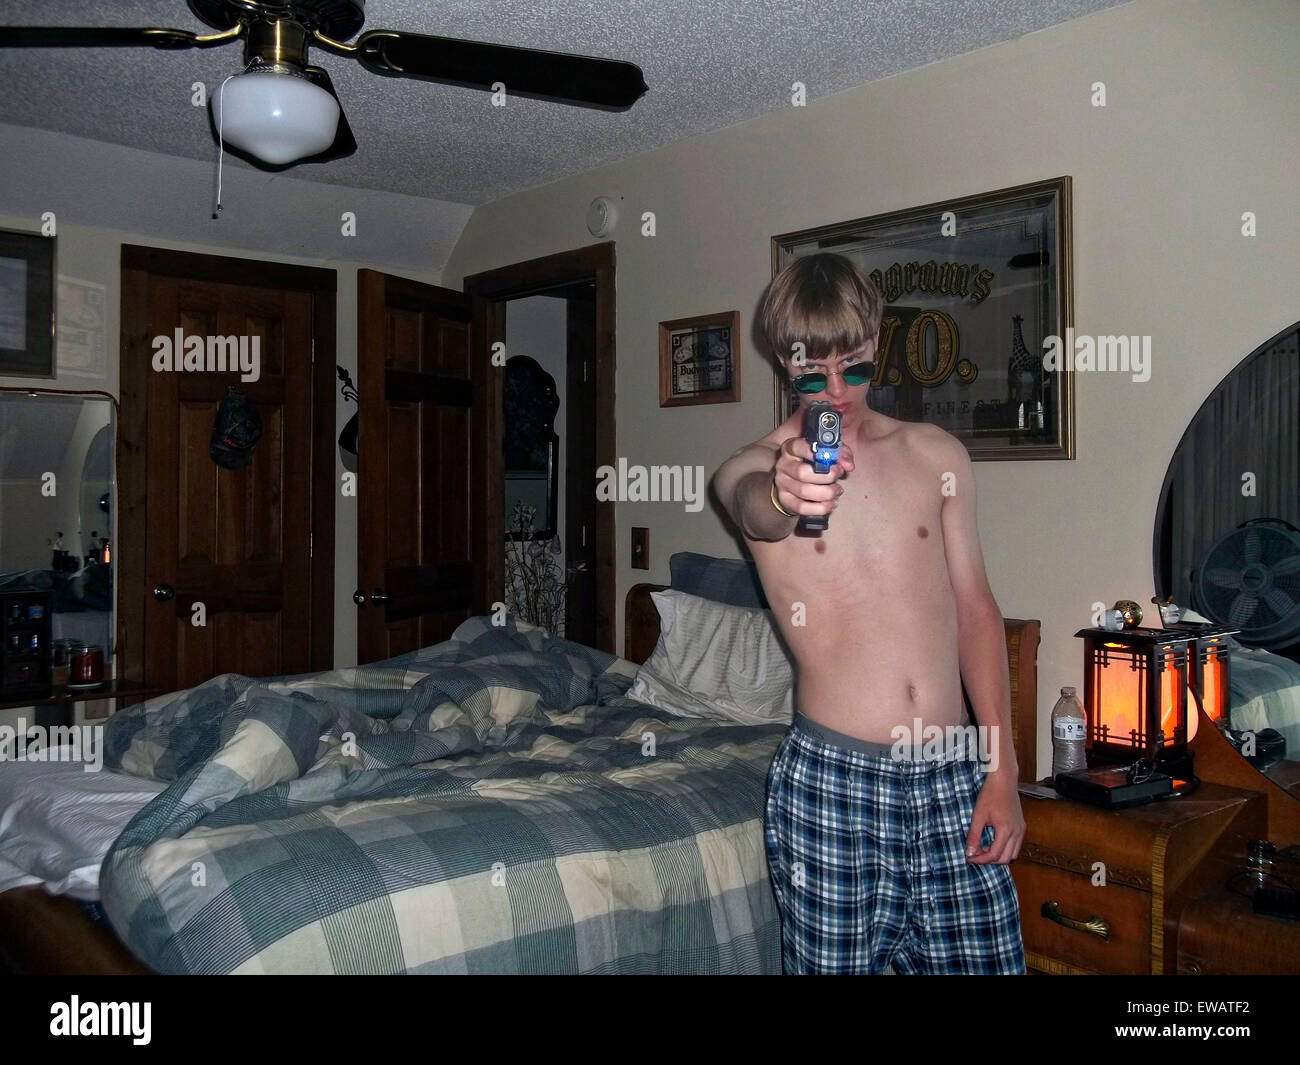 Charleston, South Carolina, USA. 21st June, 2015. A photo from a white supremacist website showing Dylann Storm Roof with a handgun in a bedroom April 20, 2015. Roof murdered nine members of the Emanuel African Methodist Episcopal Church in a racially motivated killing on June 17, 2015 in Charleston, S.C. Credit:  Planetpix/Alamy Live News Stock Photo